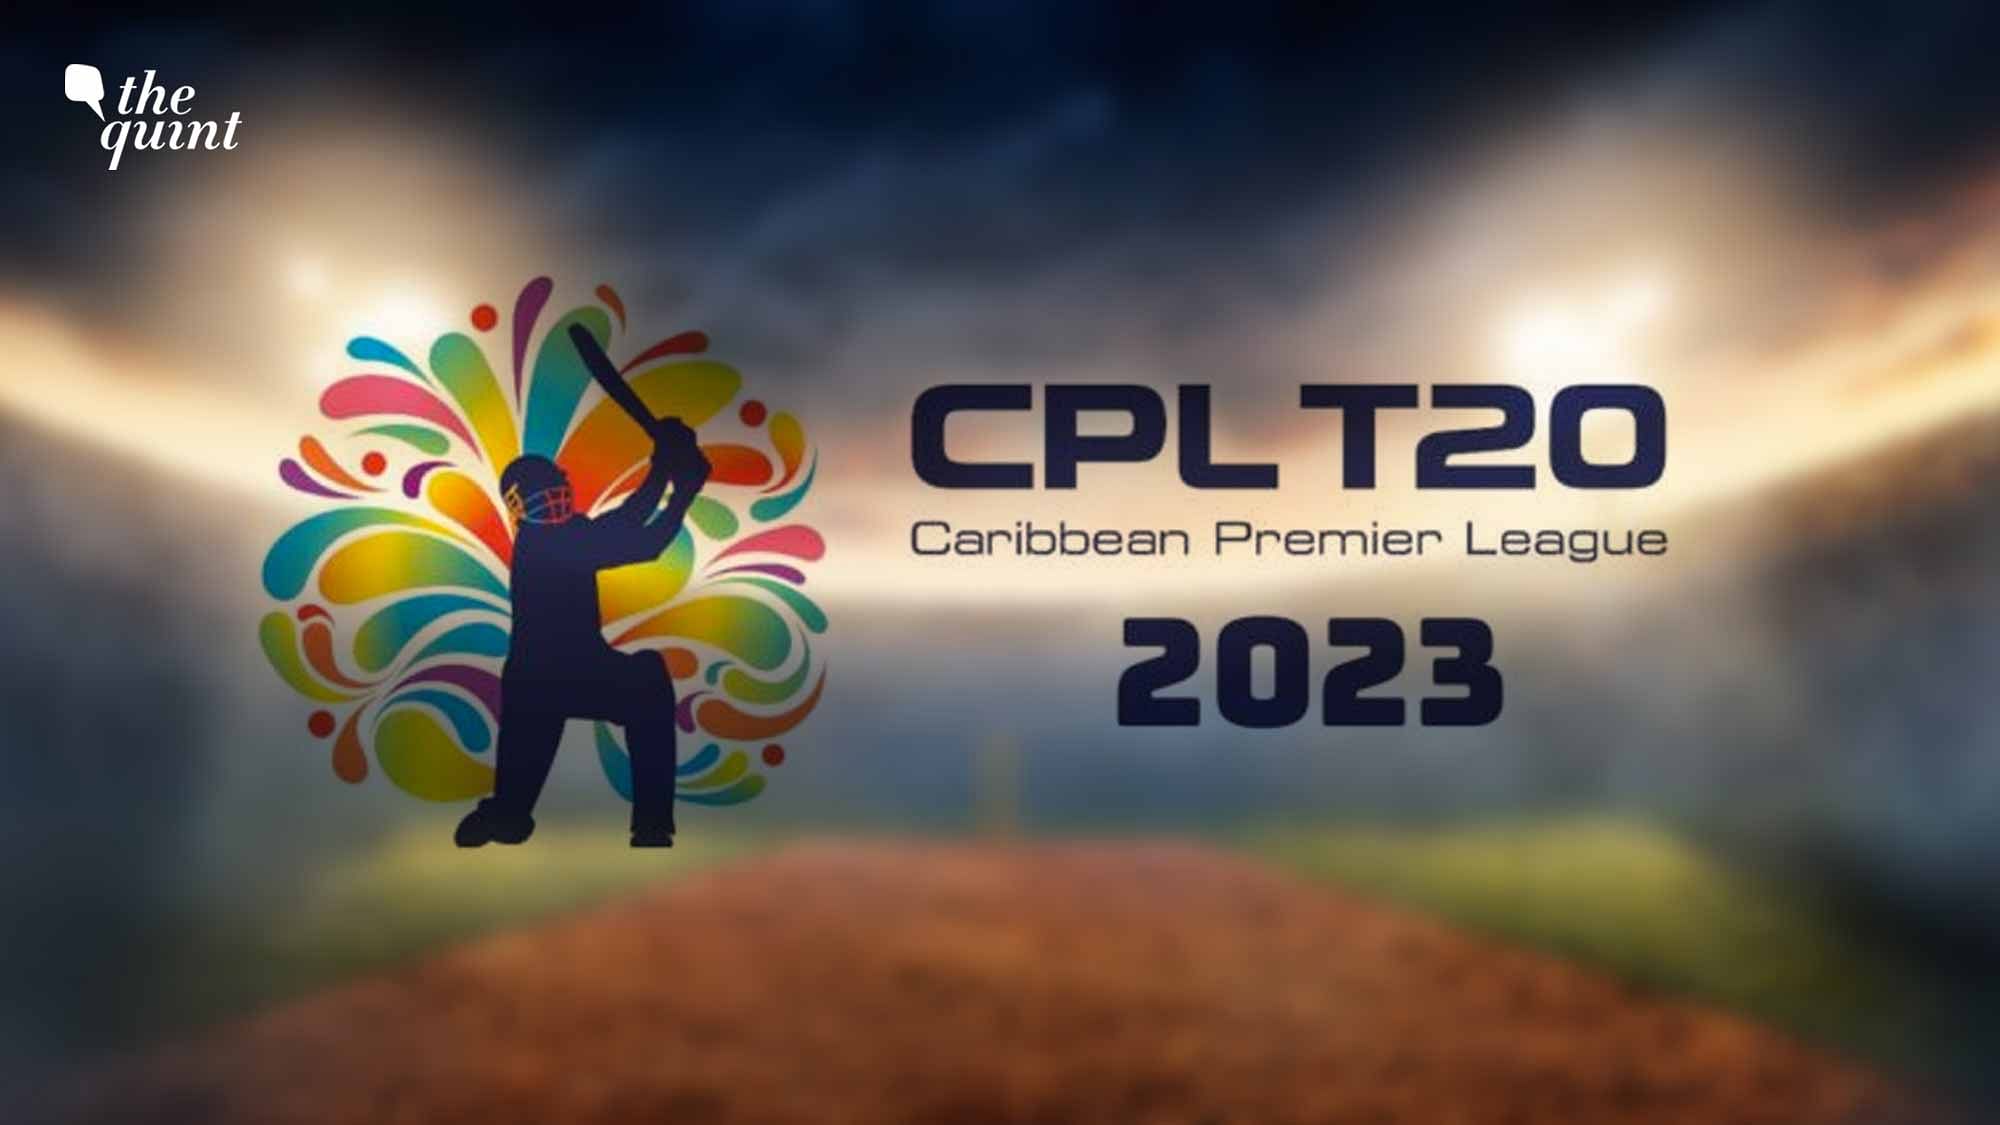 cpl live match streaming